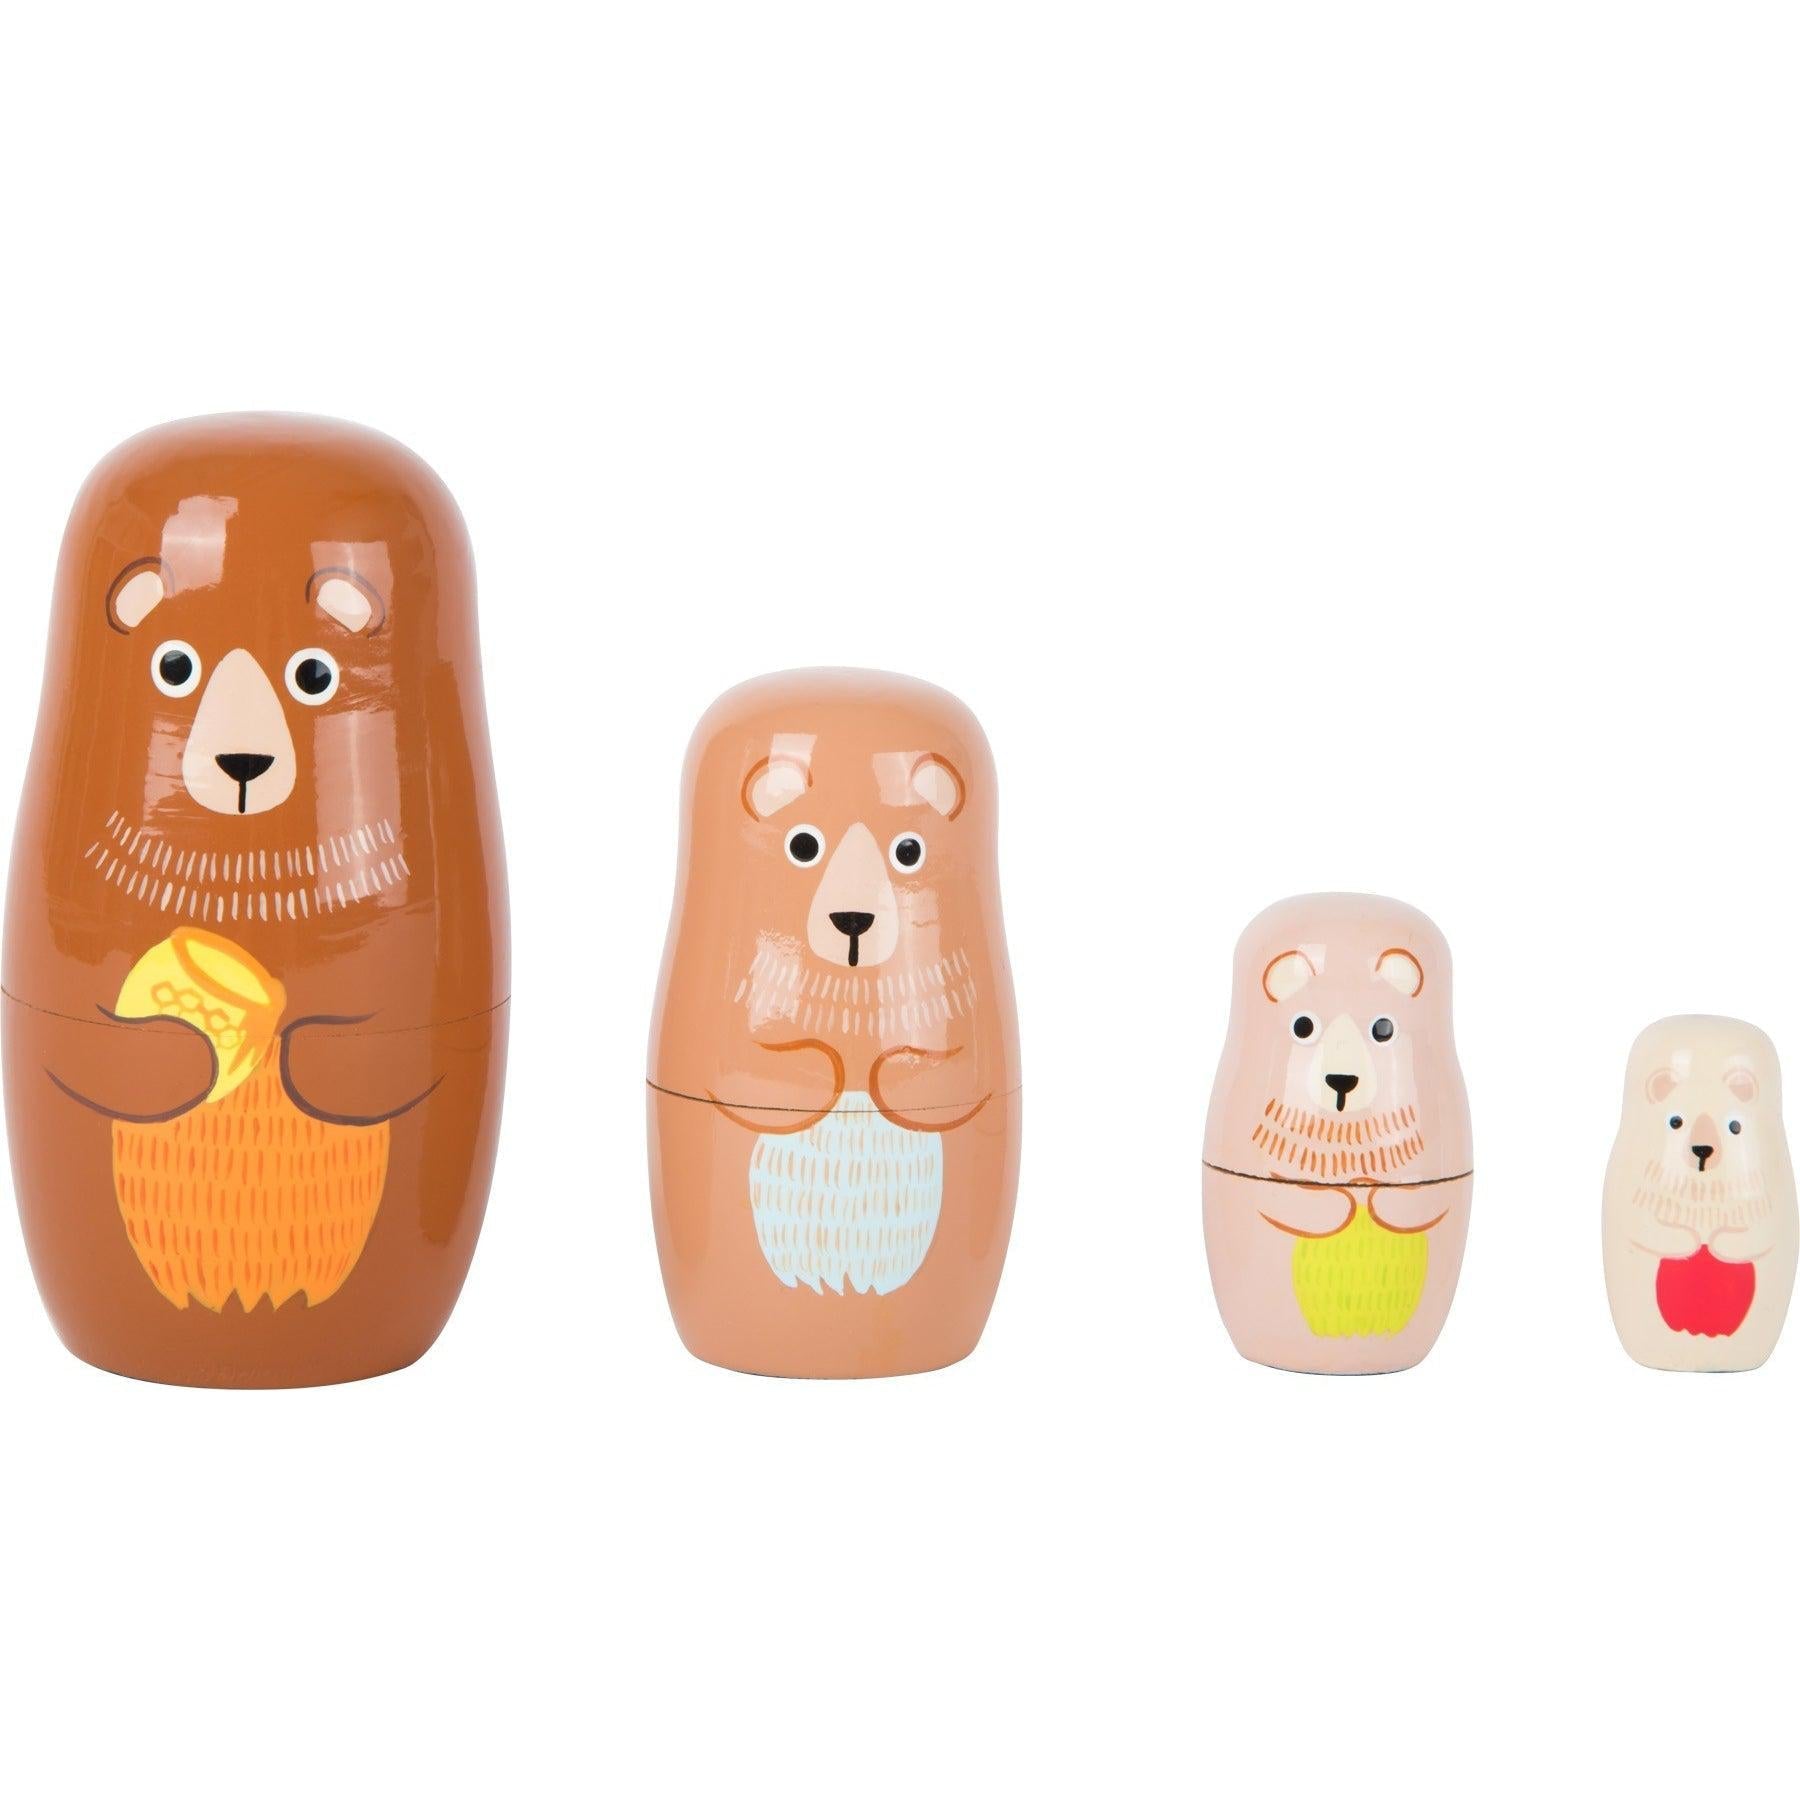 Bear Family Matryoshka, The Bear Family Matryoshka nesting dolls are a delightful and entertaining toy for children. With their bright and bold designs, they are sure to capture the attention and imagination of little ones. These nesting dolls are also a super size, making them easy to take on the go when kids need something to keep them occupied.The Bear Family Matryoshka set includes four cute bear figurines that can be easily stacked inside one another. Each wooden doll is painted with great detail, offe